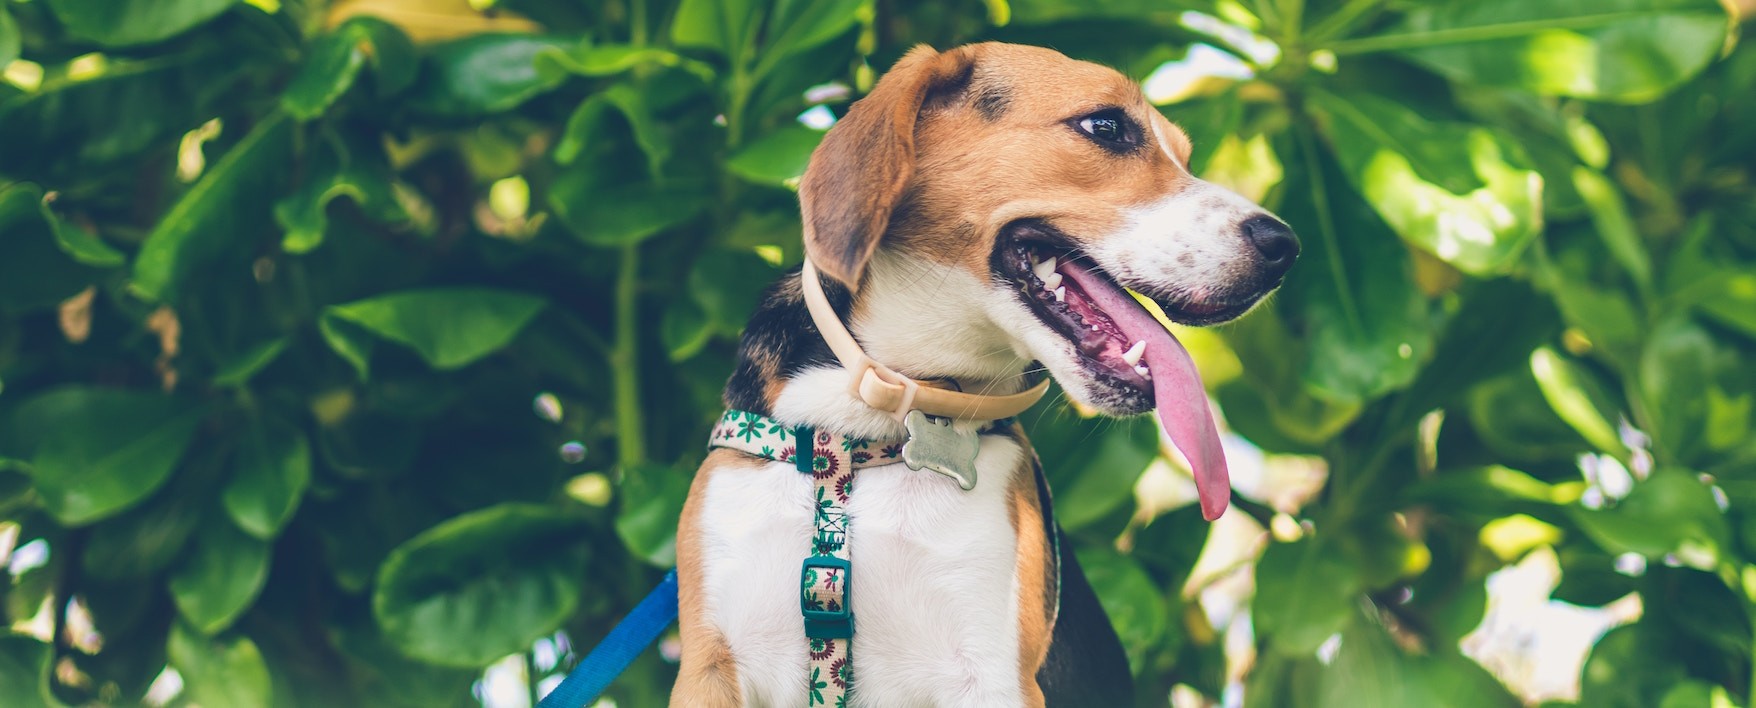 Puppy Love: 5 Reasons Your Workplace Should Become Dog-Friendly